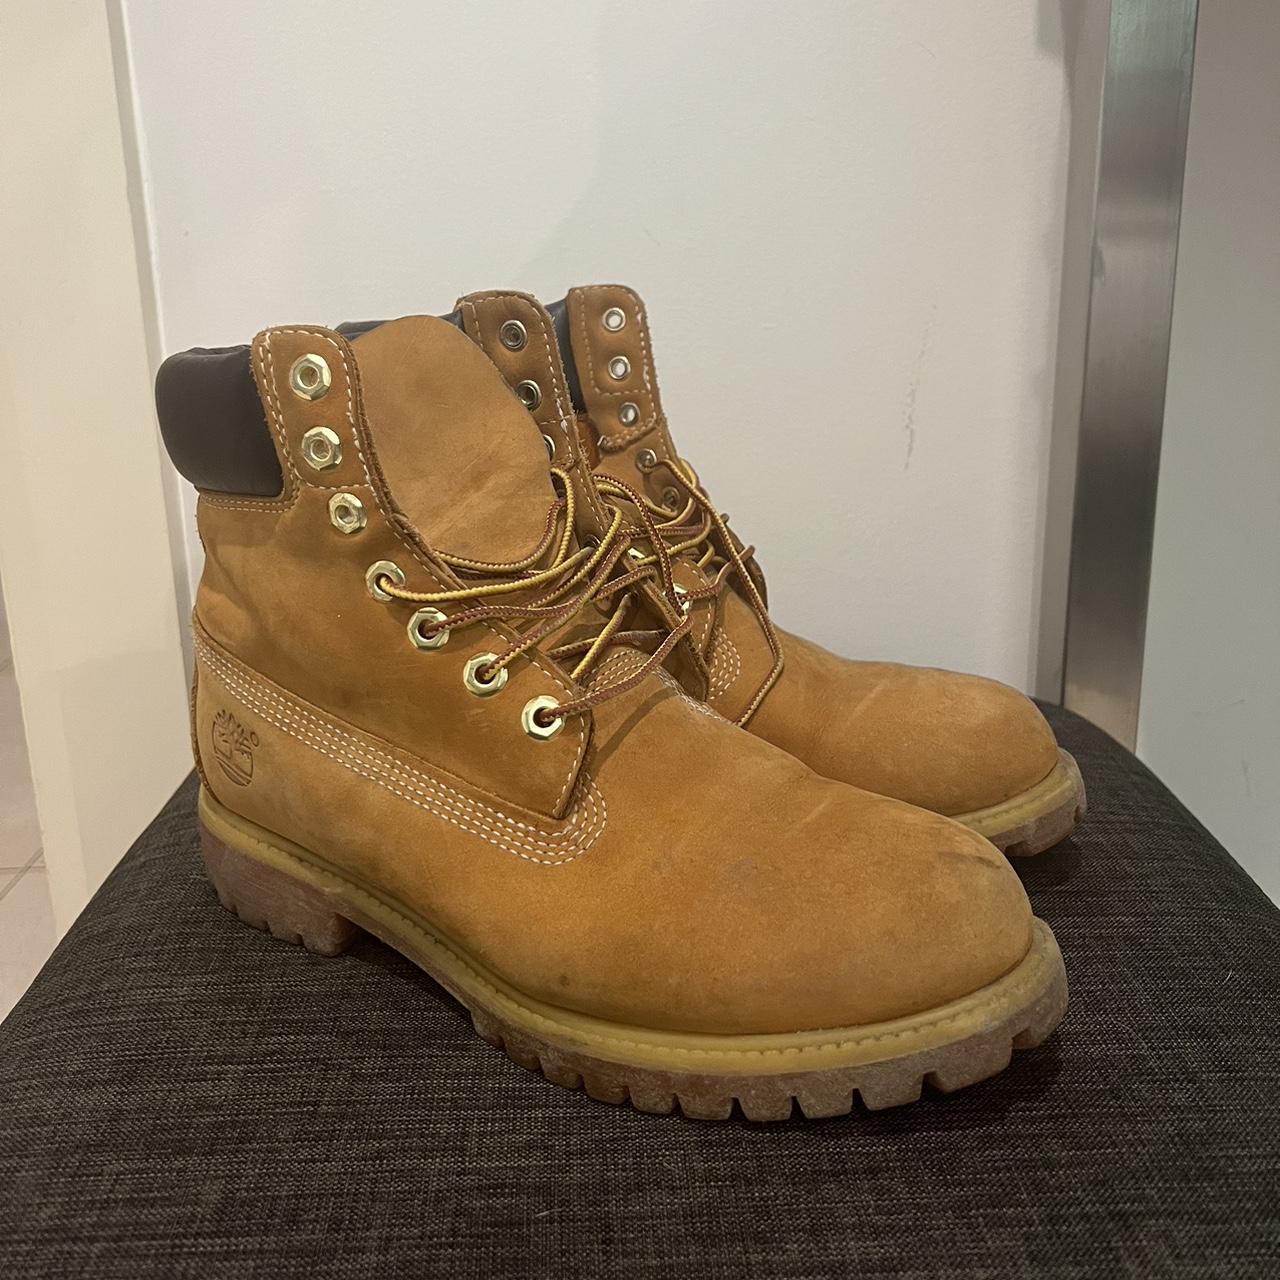 Timbs. Worn, with some damage but still in great... - Depop